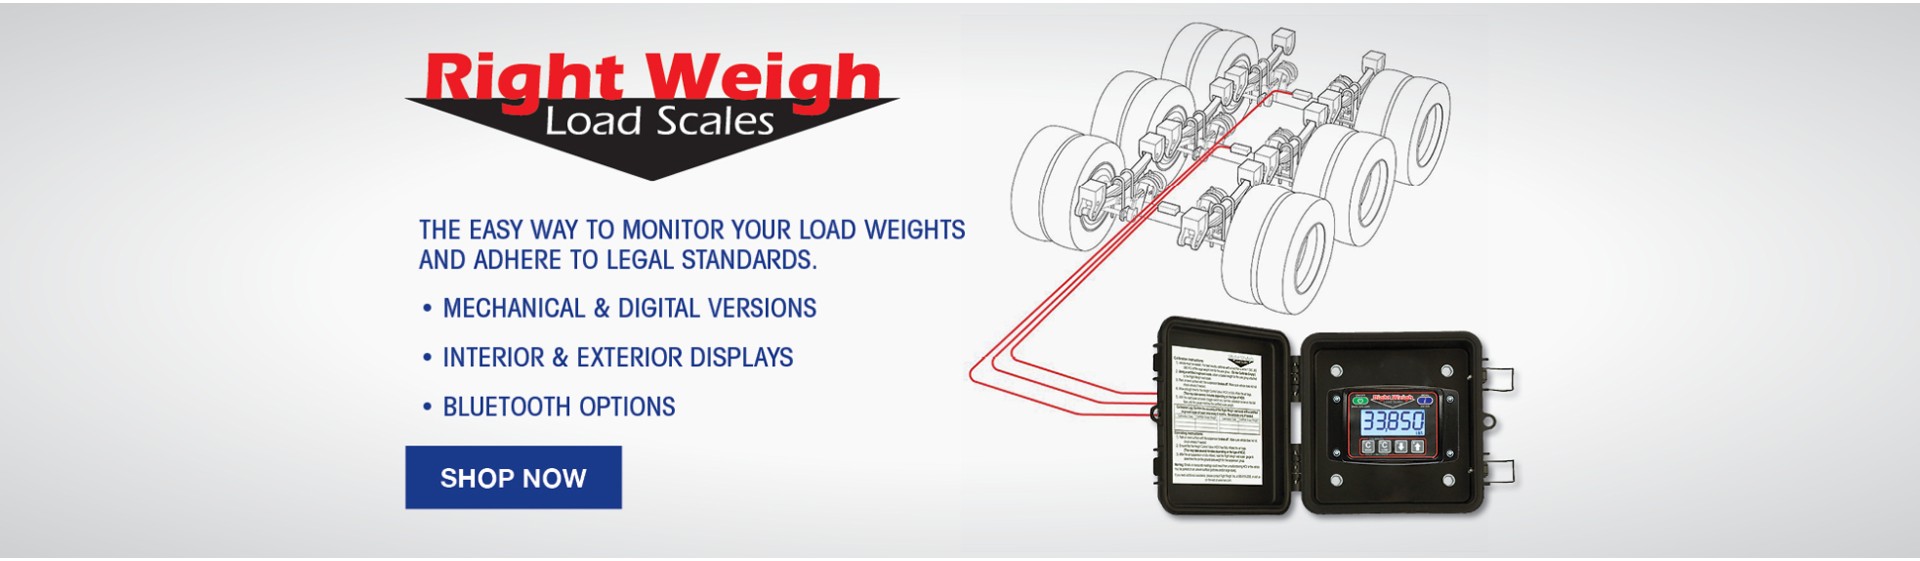 Right Weigh Load Scale